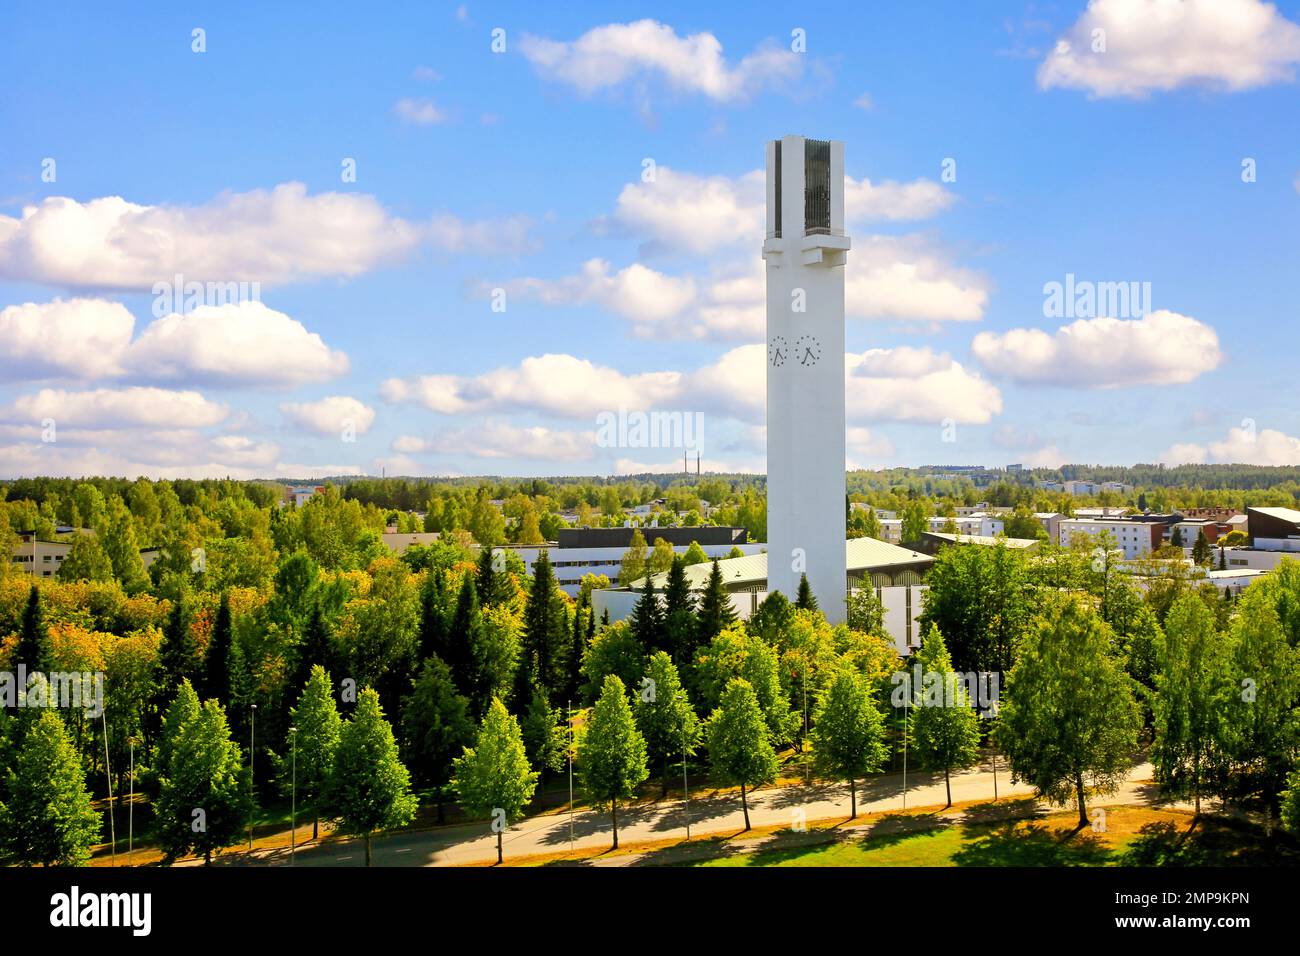 Lakeuden Risti church and the 65 meters high cross-shaped bell tower by Alvar Aalto is a distinct landmark of Seinäjoki, Finland. August 2019. Stock Photo